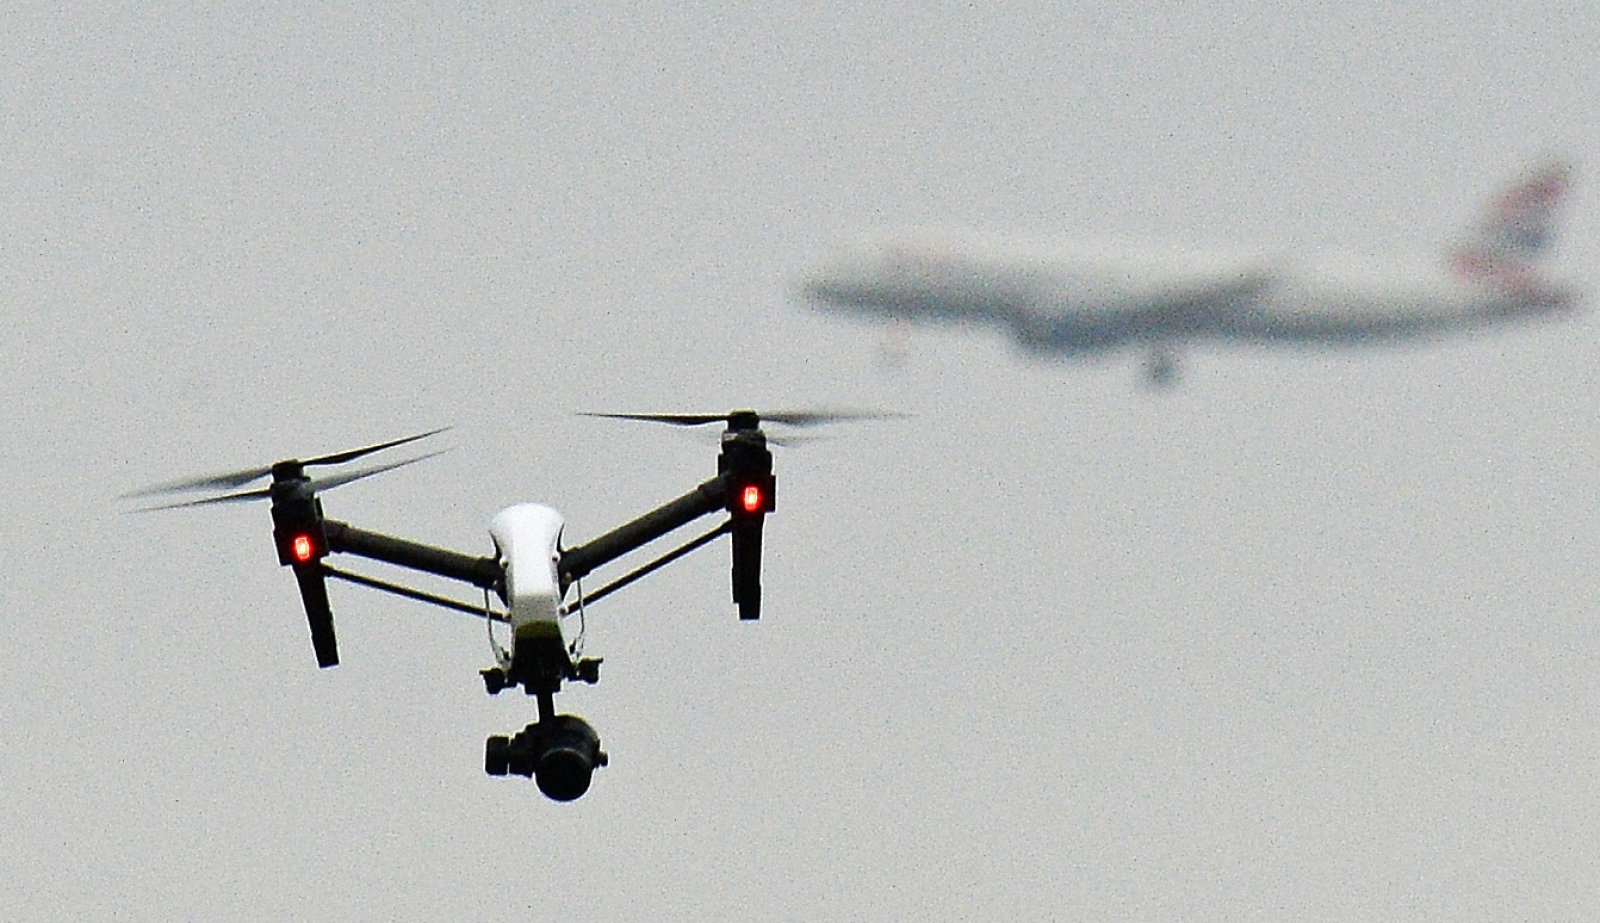 Air traffic controllers may get a break from non-stop drone reports | DeviceDaily.com